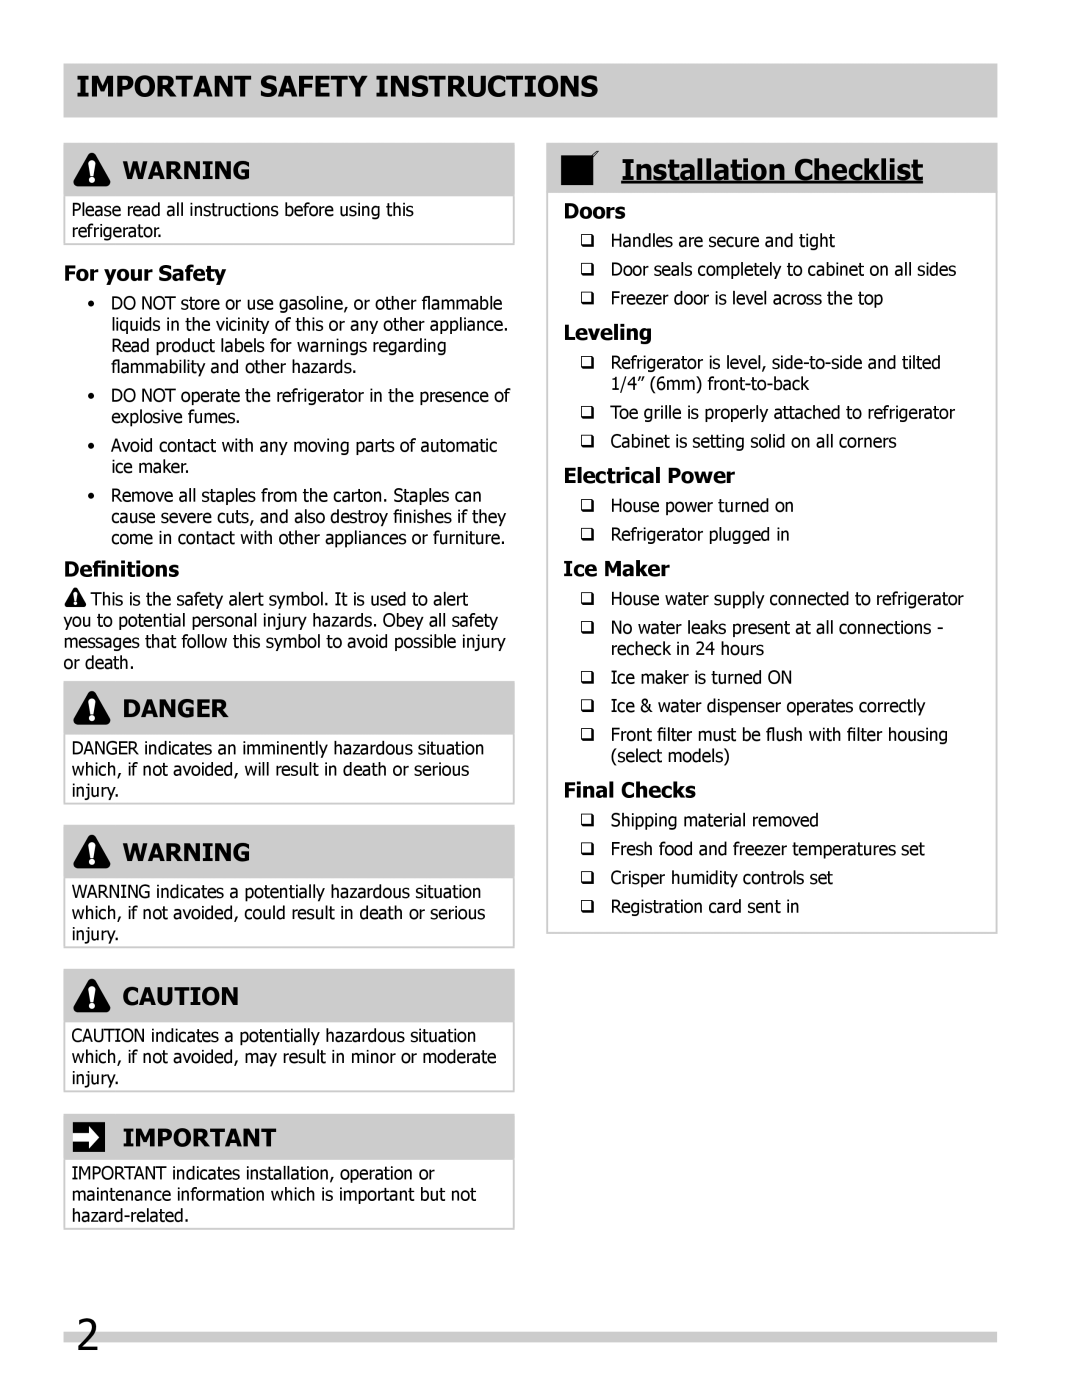 Frigidaire 242111900 Important Safety Instructions, Installation Checklist, Danger, For your Safety, Definitions, Doors 